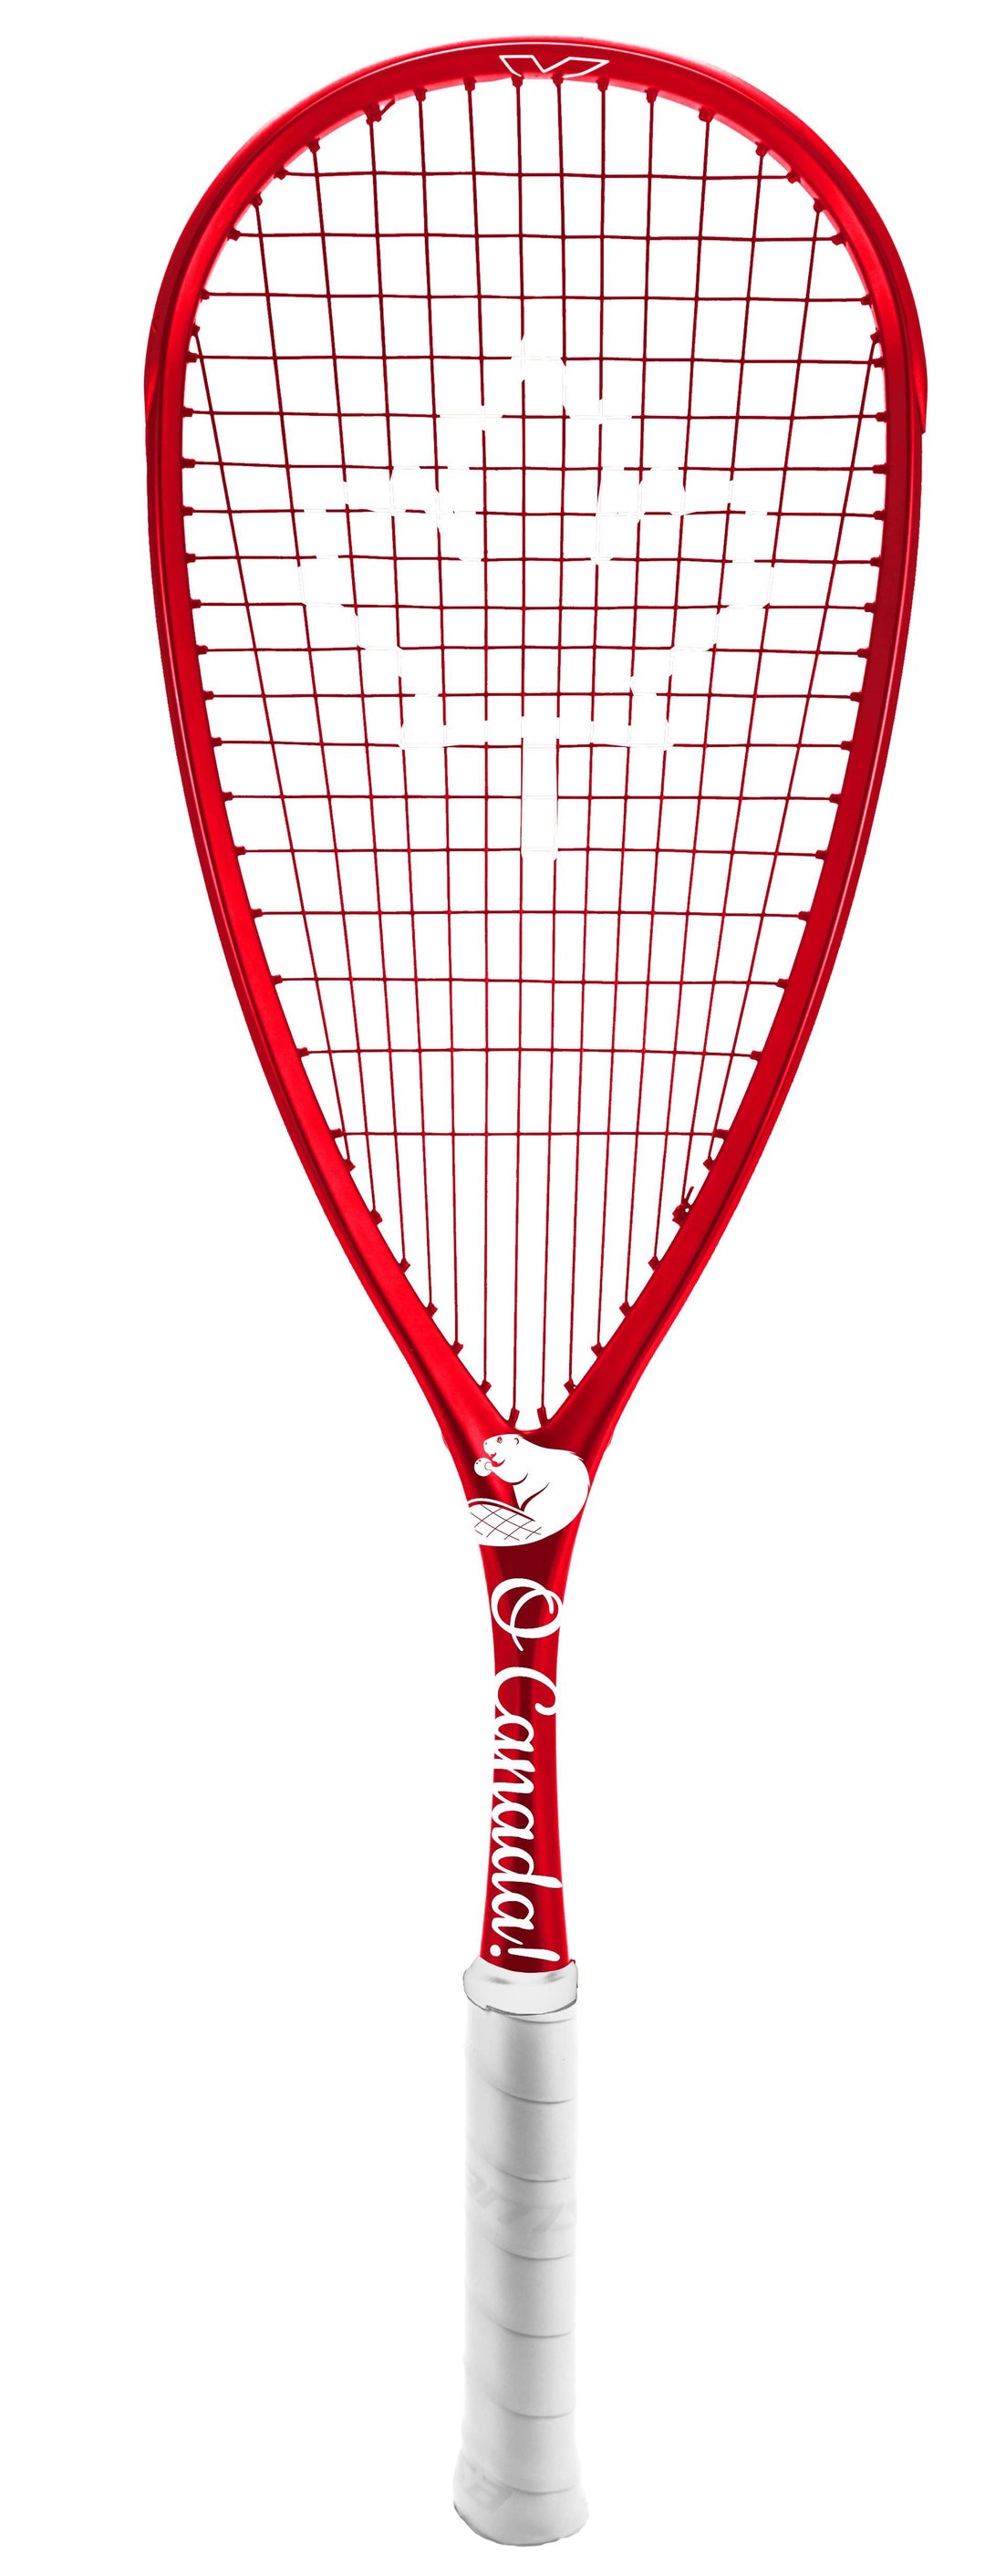 Xamsa Onyx eXposed - O Canada! - Limited Edition Squash Racquet with Eyelets Squash Racquets Xamsa Strung with Xamsa PM18 Red with Canada Stencil 